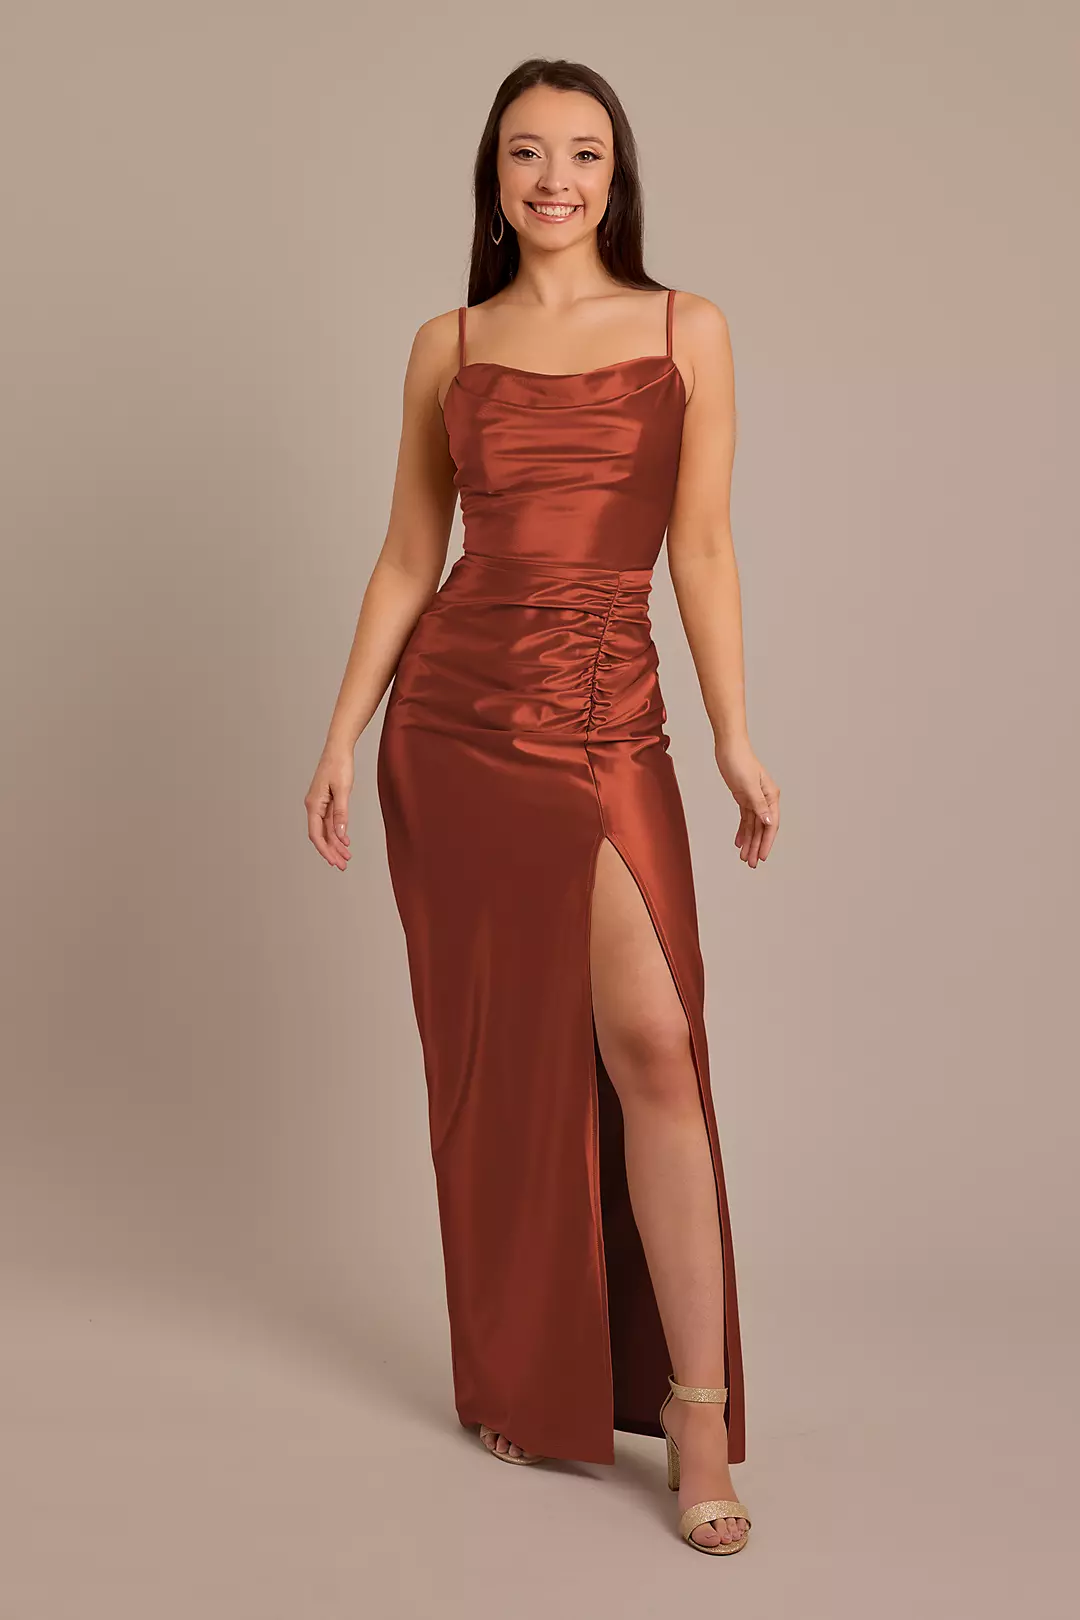 Sculpting Satin Cowl Neck Ruched Dress Image